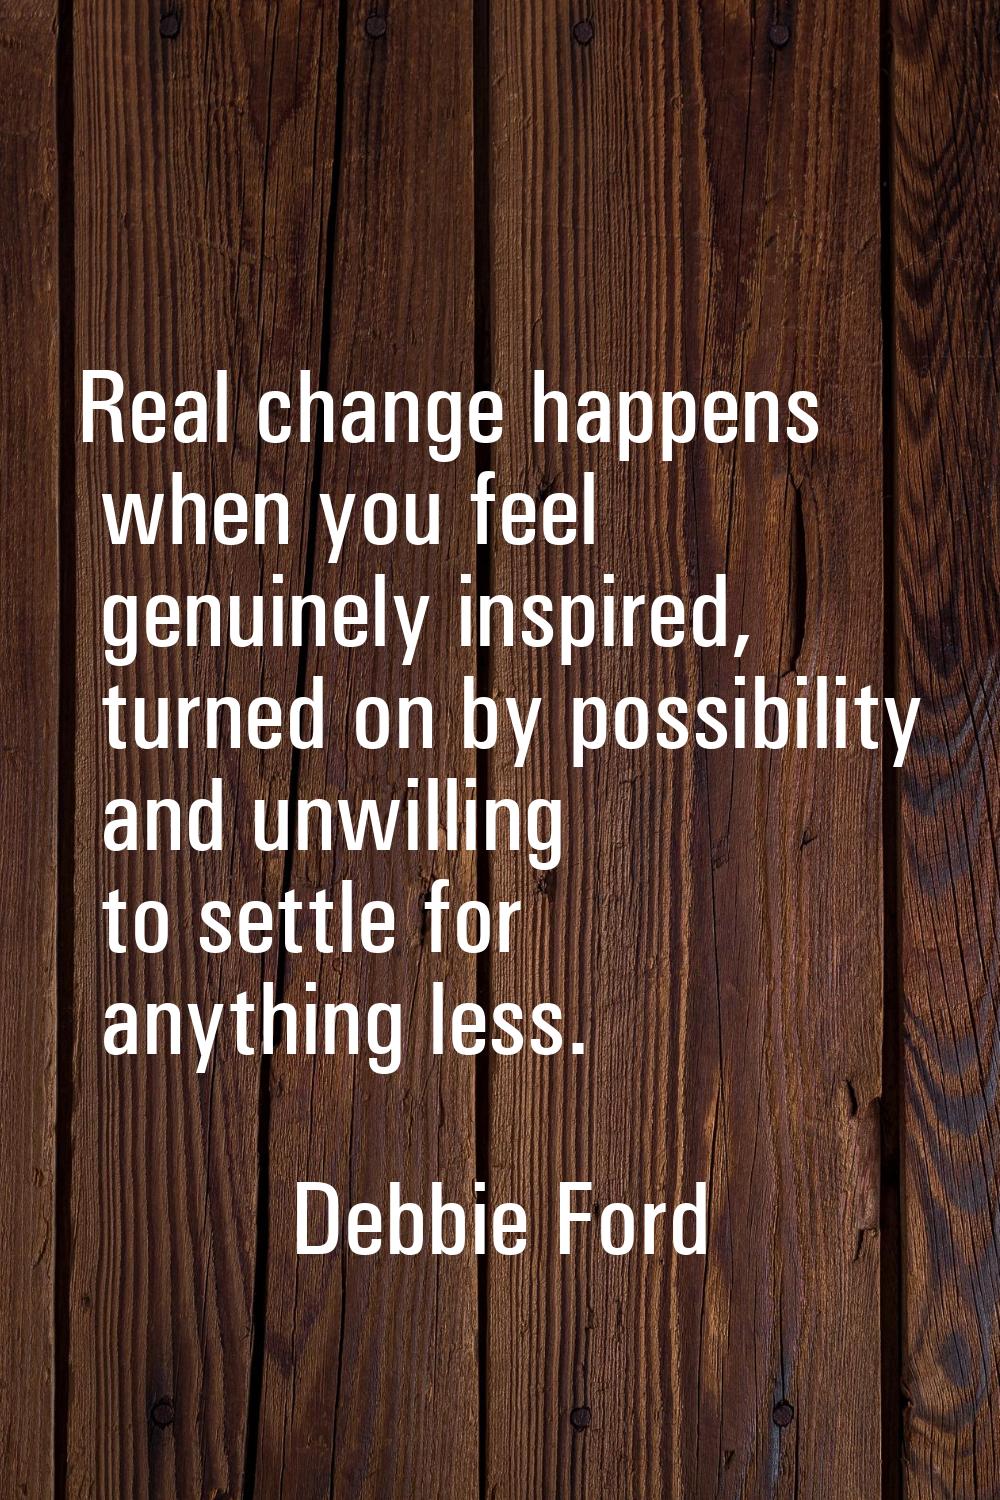 Real change happens when you feel genuinely inspired, turned on by possibility and unwilling to set